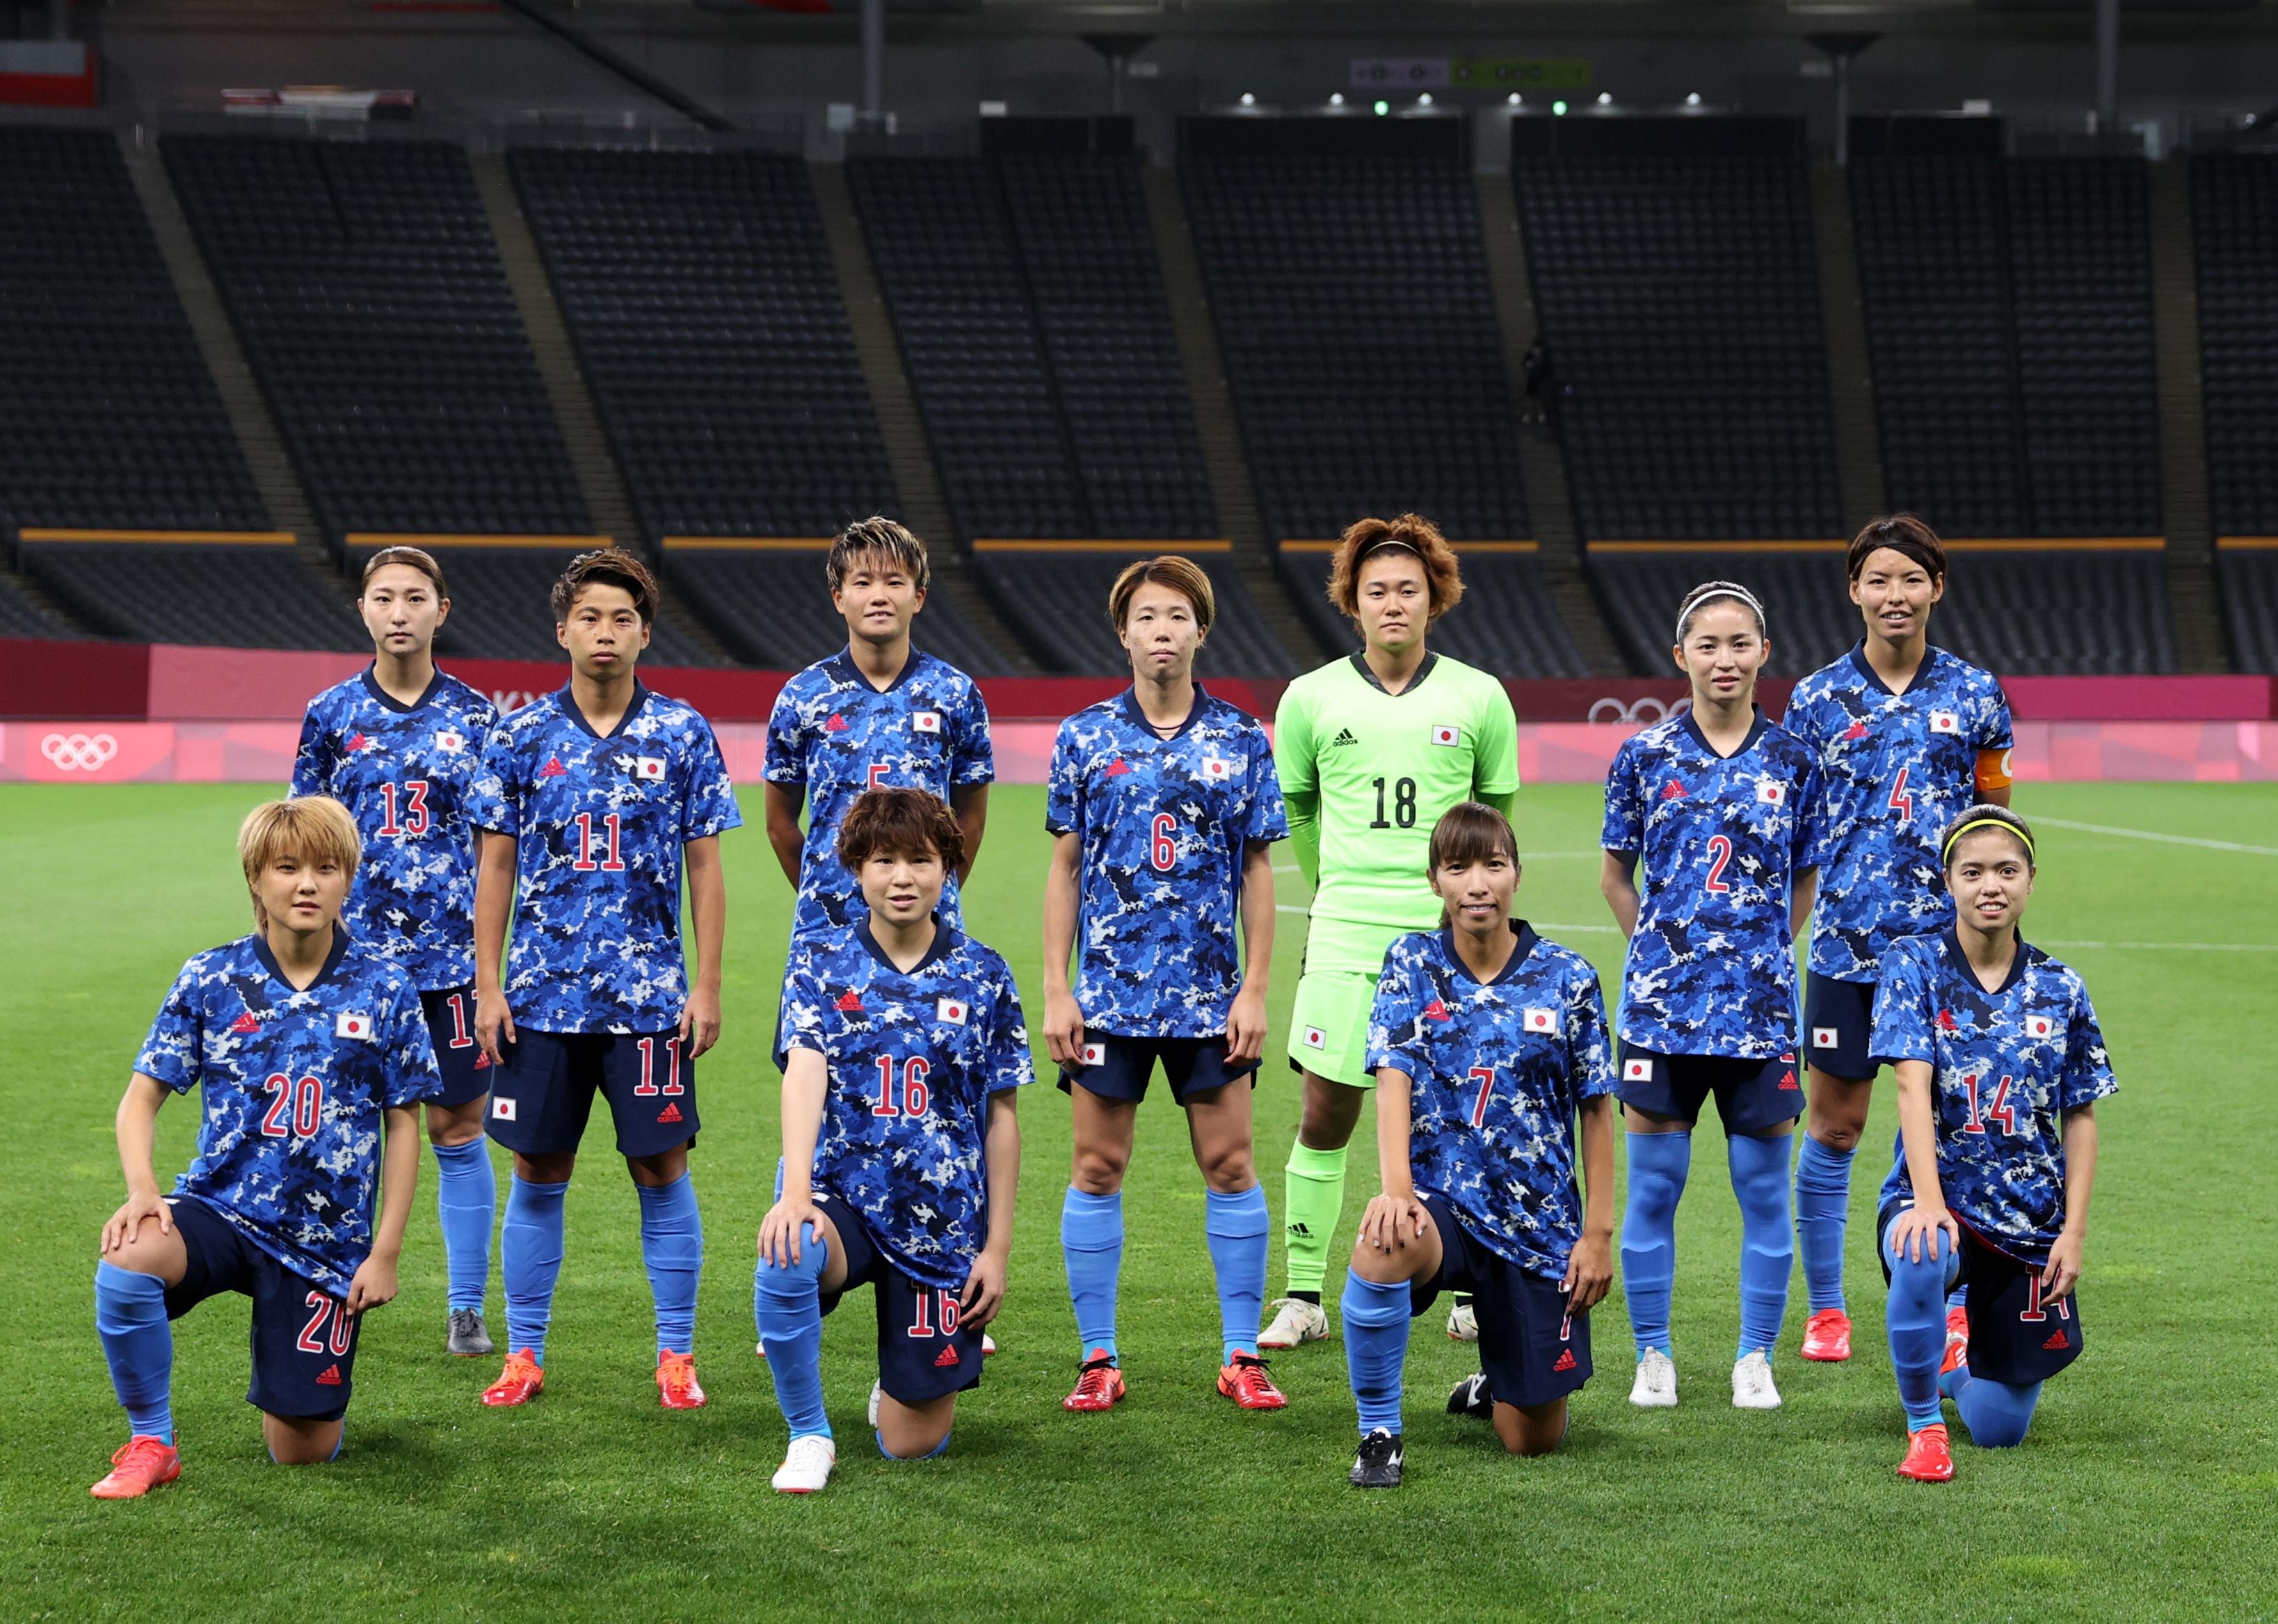 Players of Team Japan pose for a team photo prior to the Women's First Round Group E match between Japan and Great Britain during the Tokyo 2020 Olympic Games.